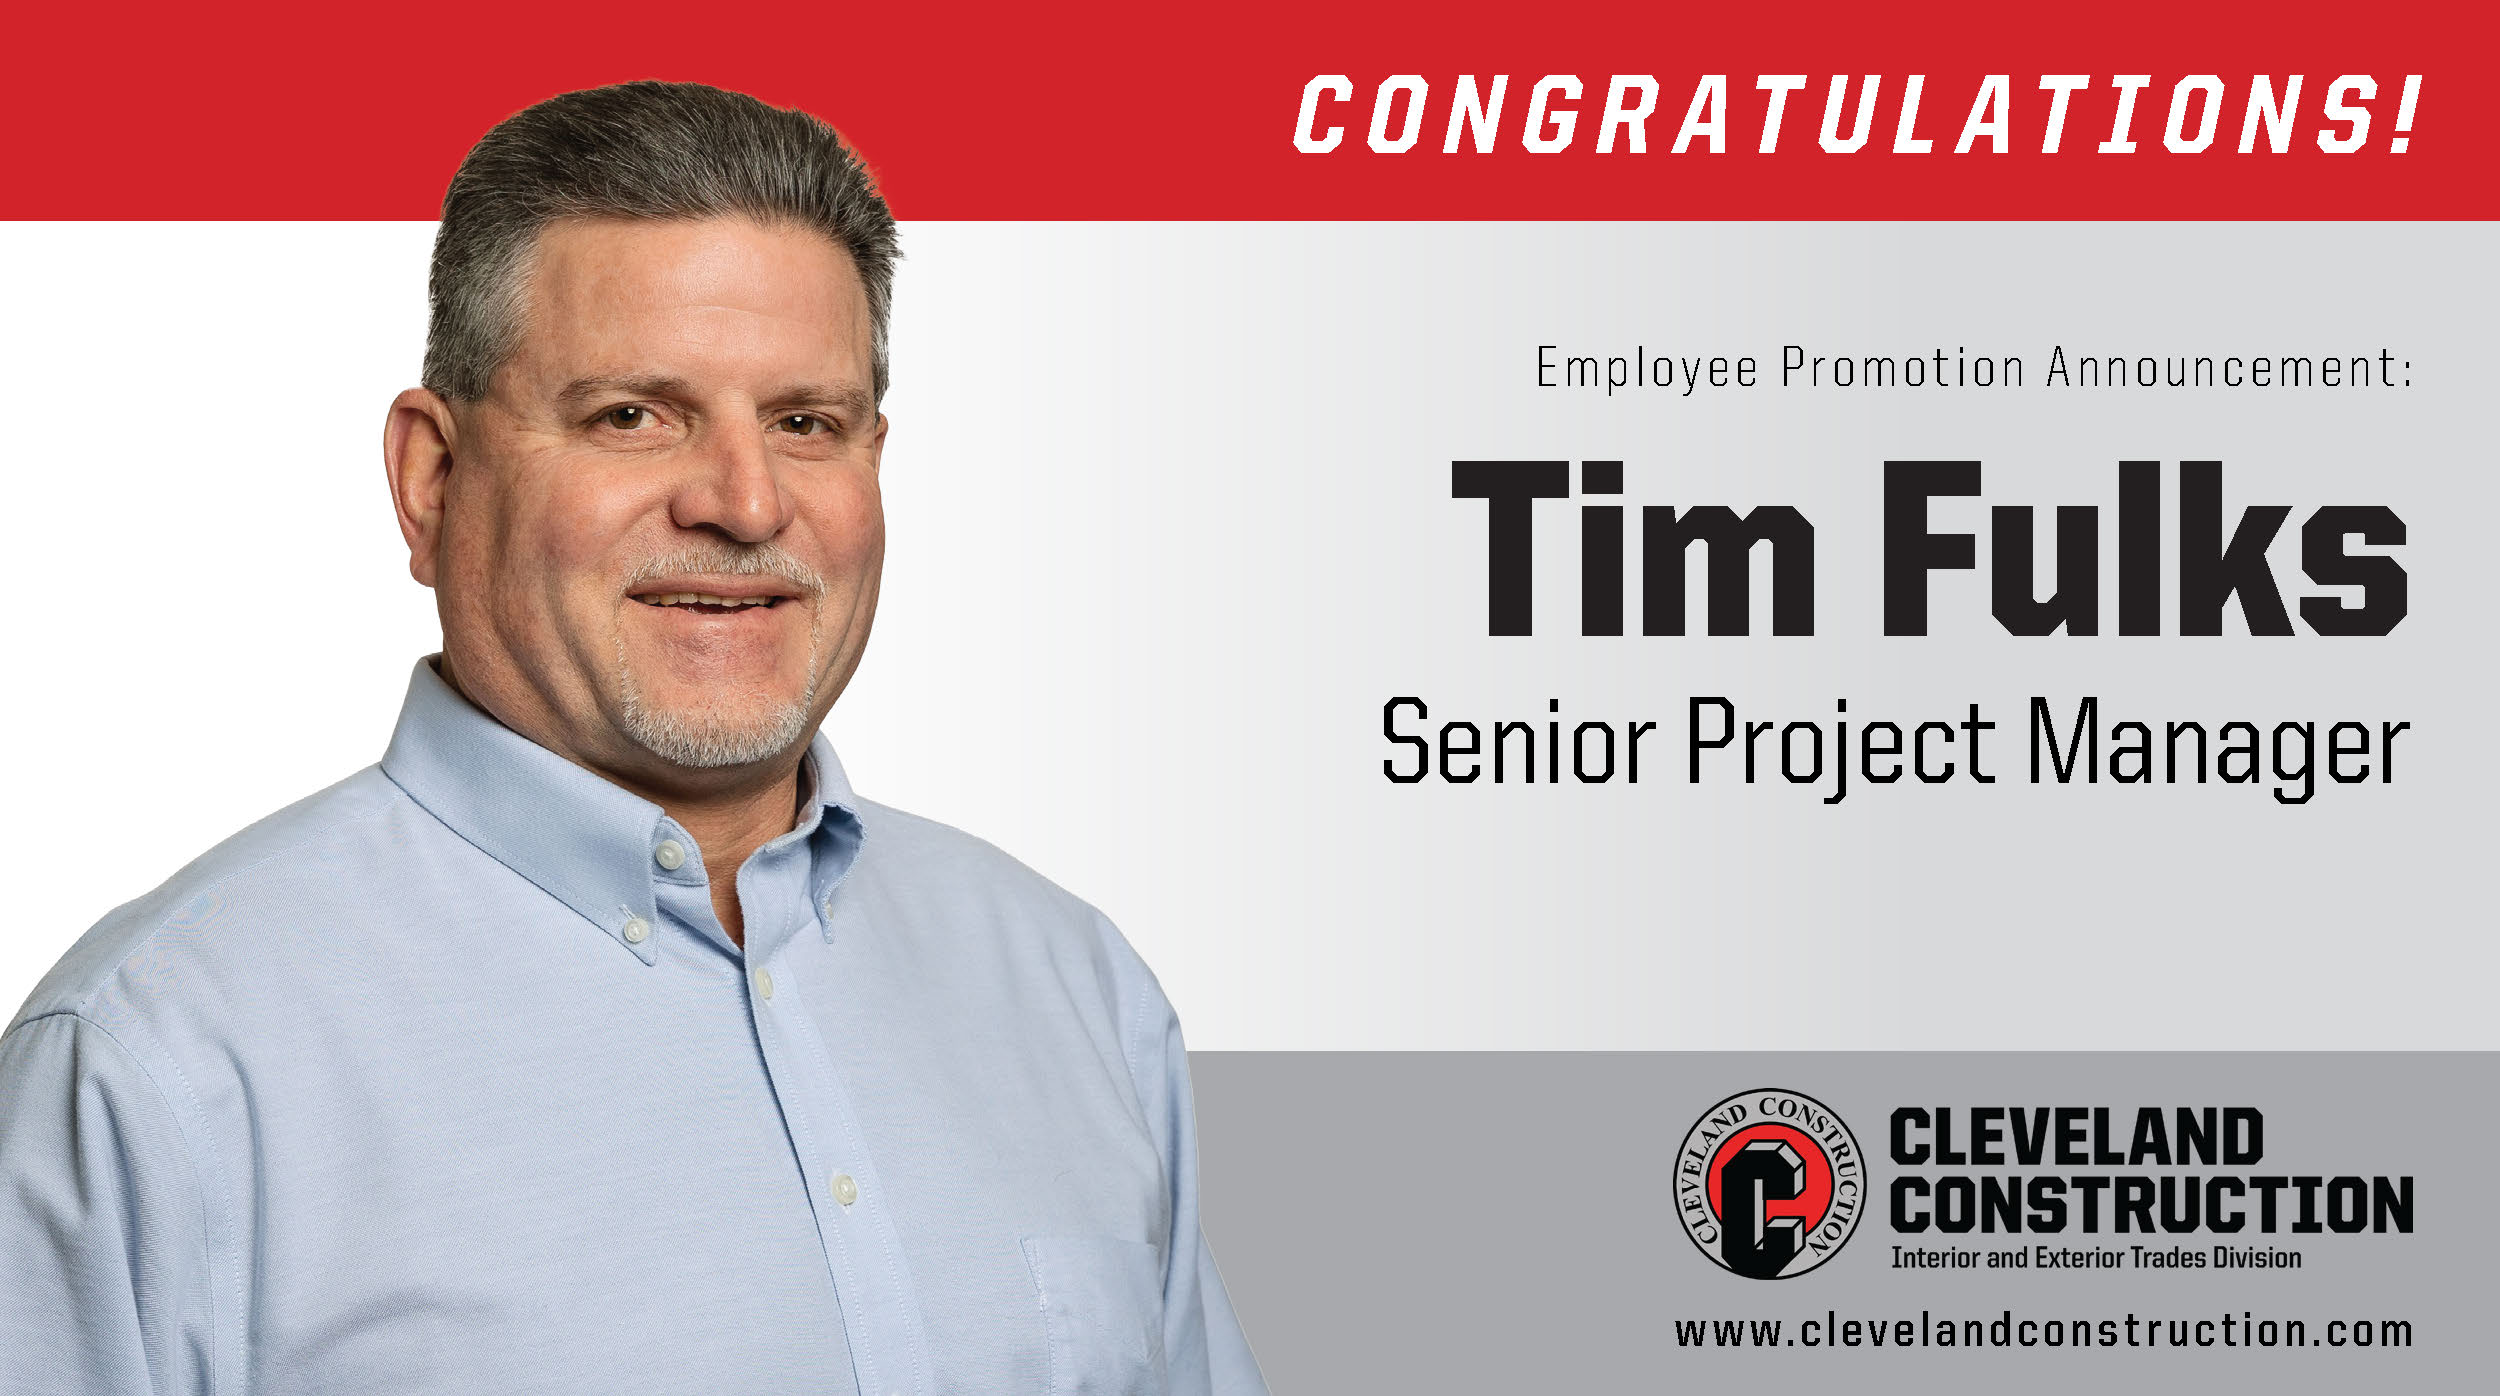 Tim Fulks Promoted to Senior Project Manager